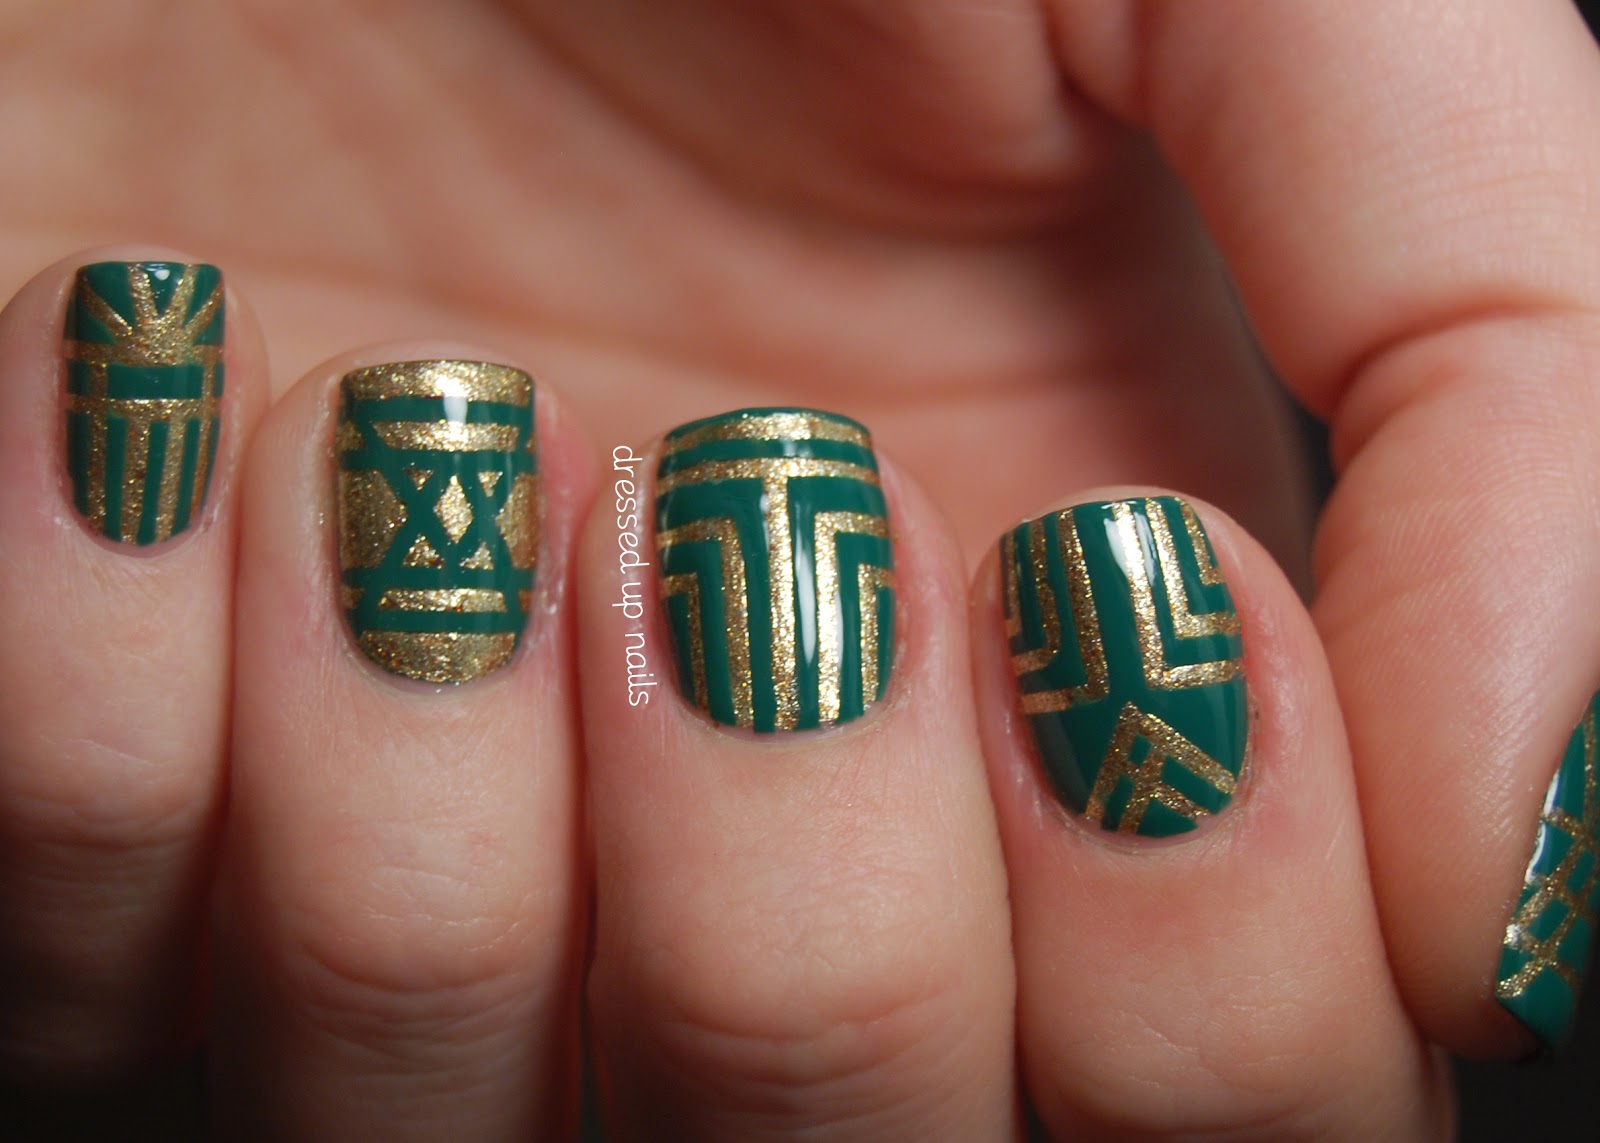 7. Surgical Tape Nail Art for Long Nails - wide 8